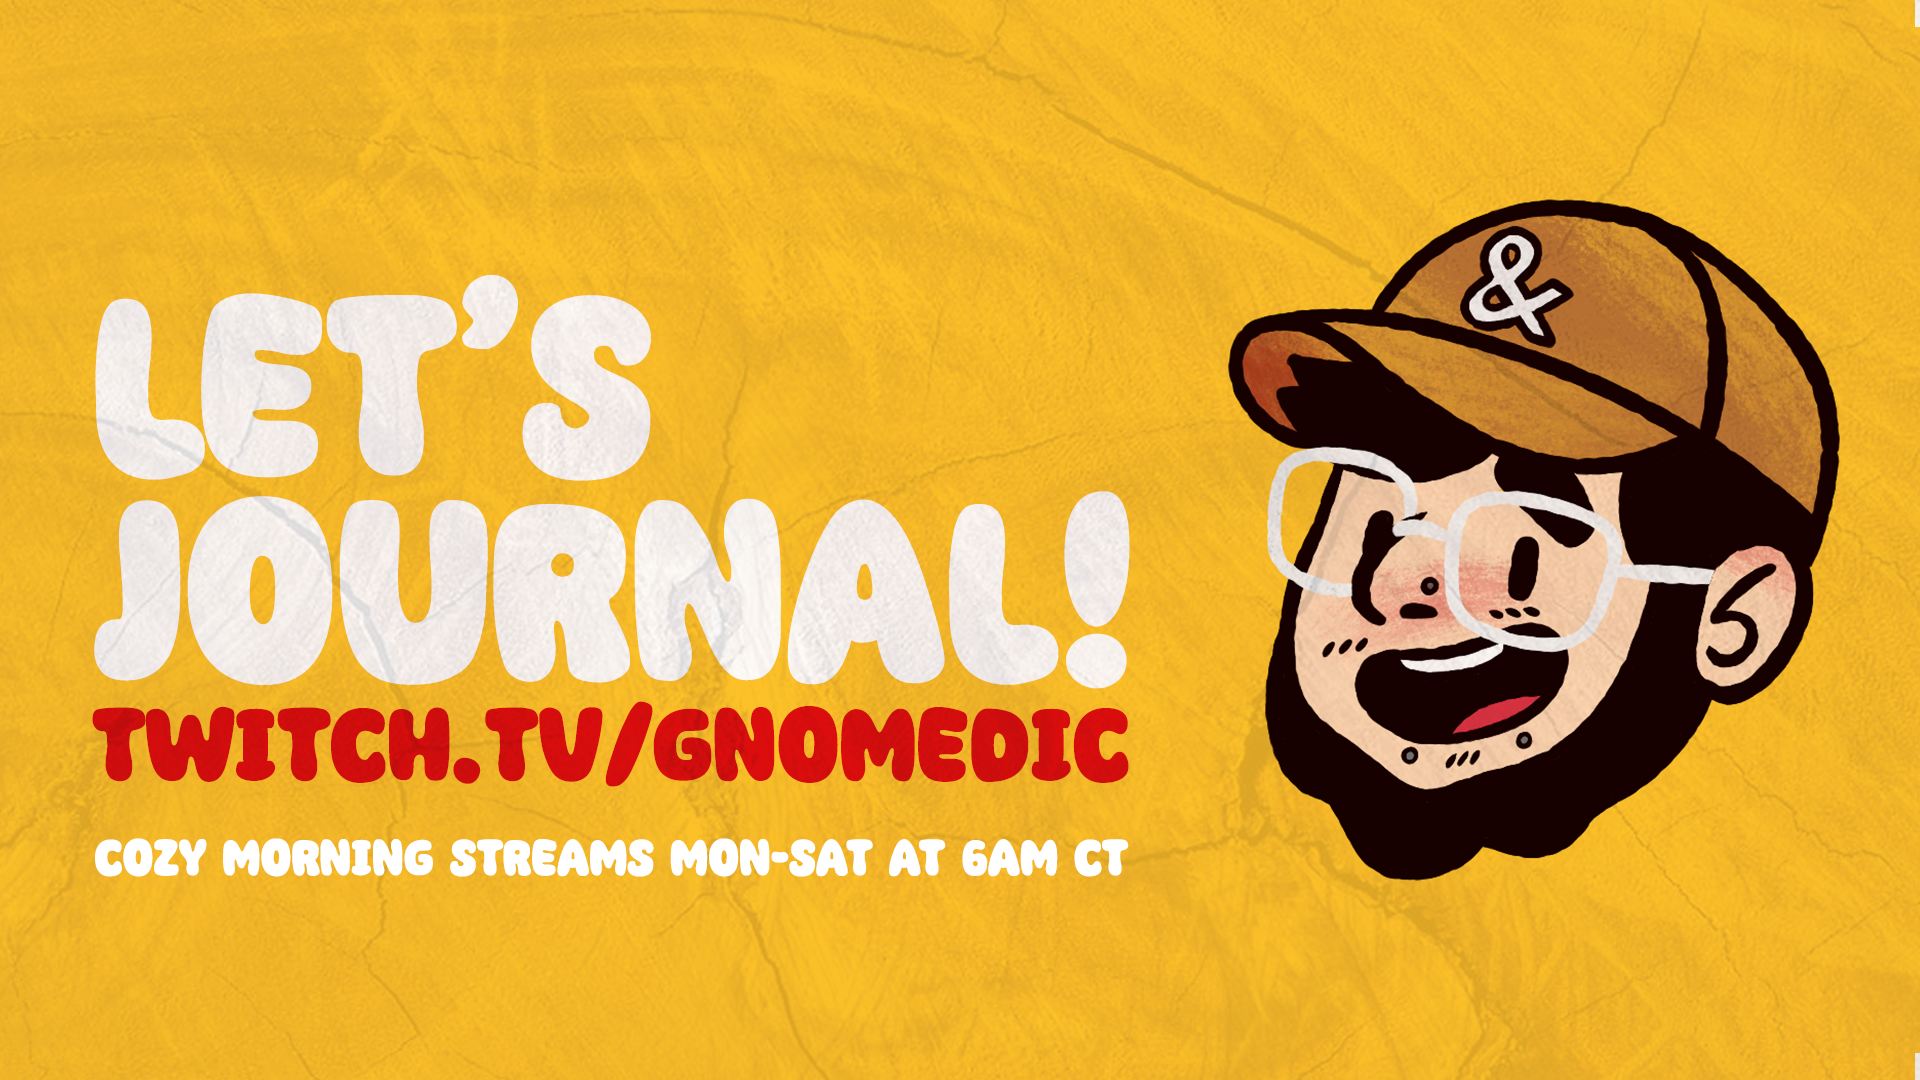 let's journal! twitch.tv/gnomedic. cozy morning streams mon-sat at 6am ct